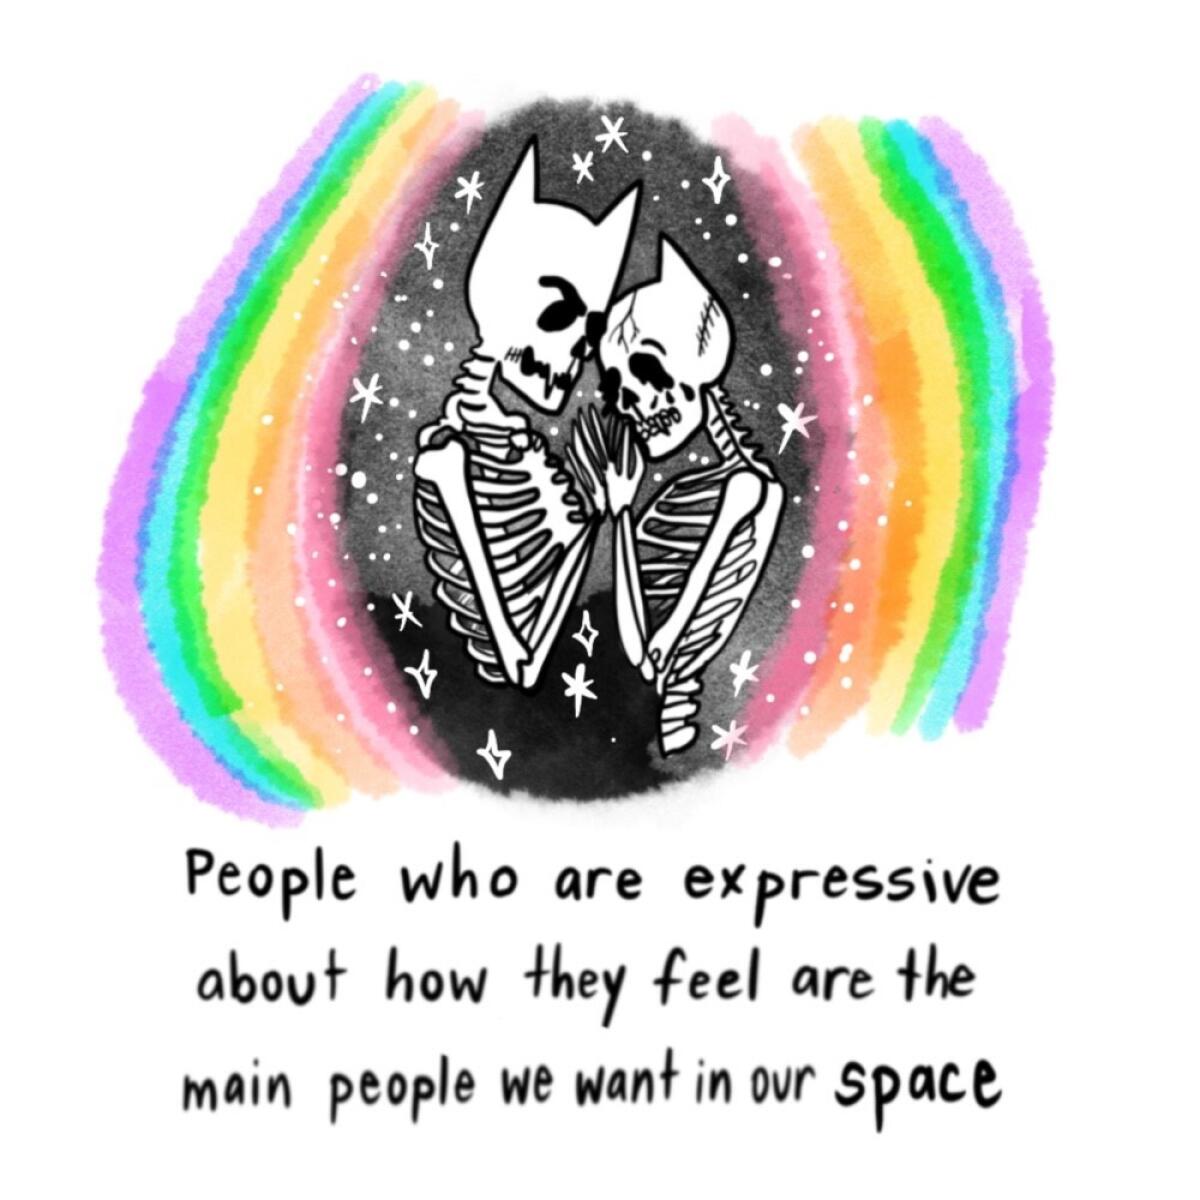 An illustration with the words: "People who are expressive about how they feel are the main people we want in our space."